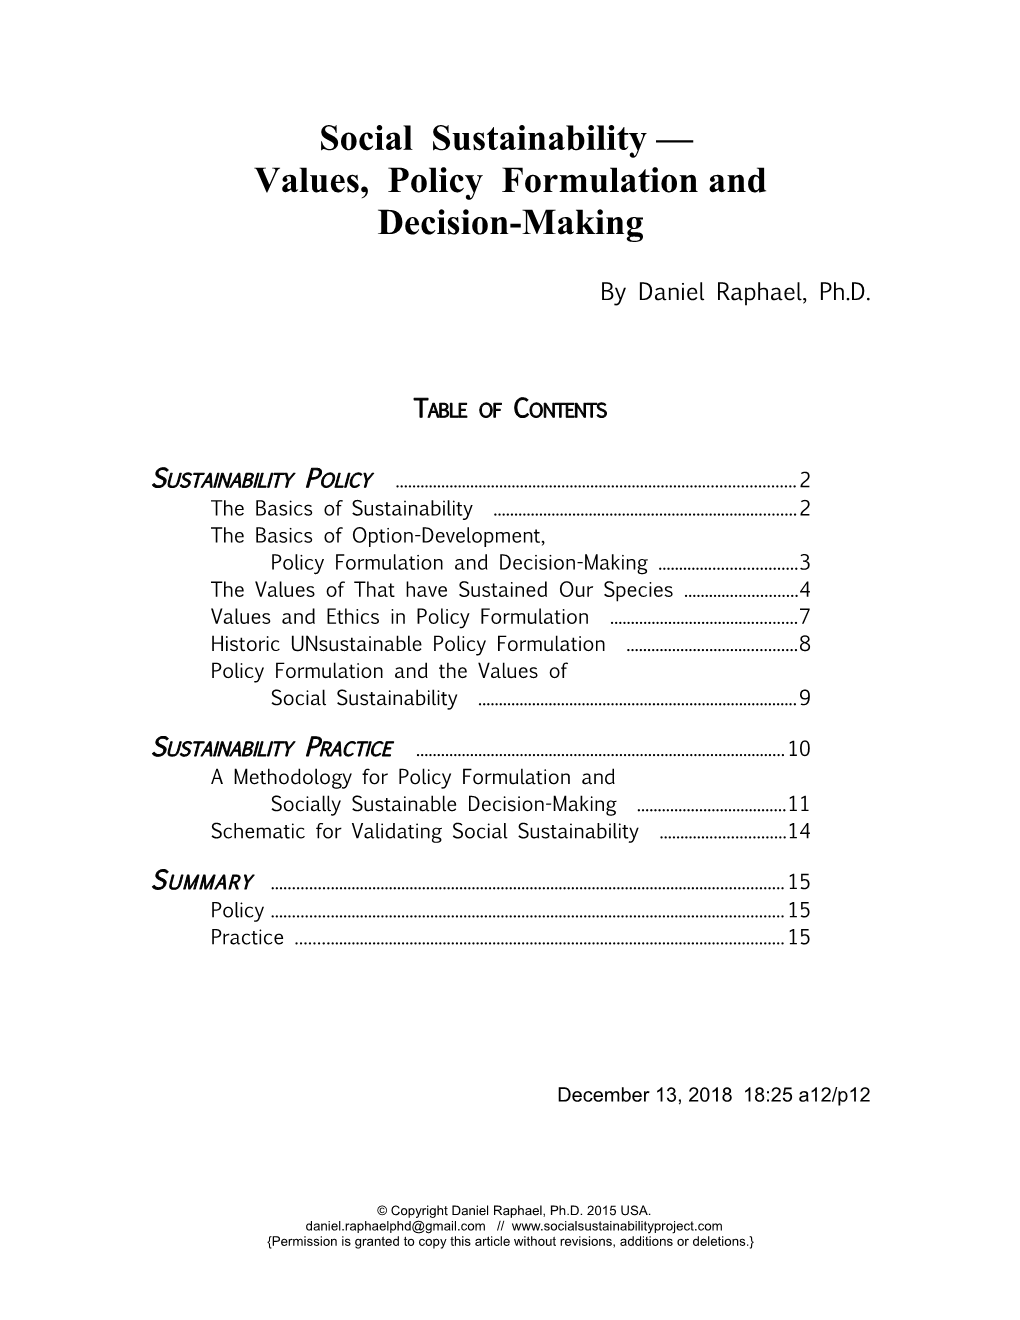 Values, Policy Formulation And